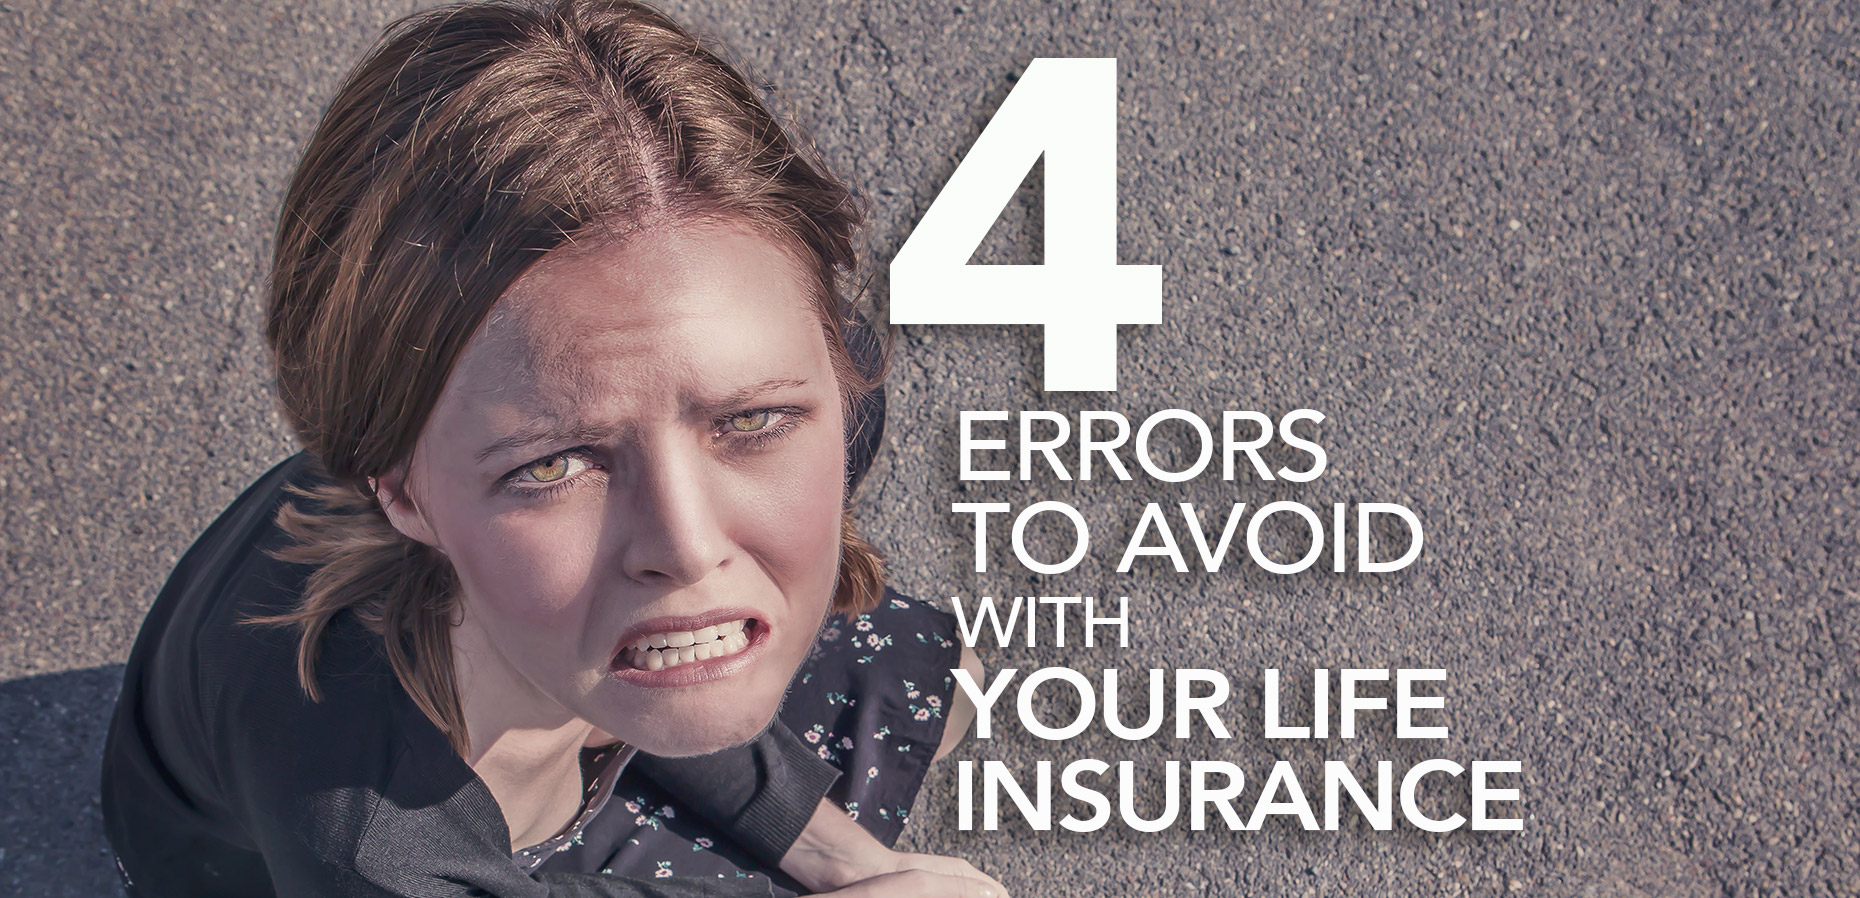 4 Errors to Avoid With Your Life Insurance